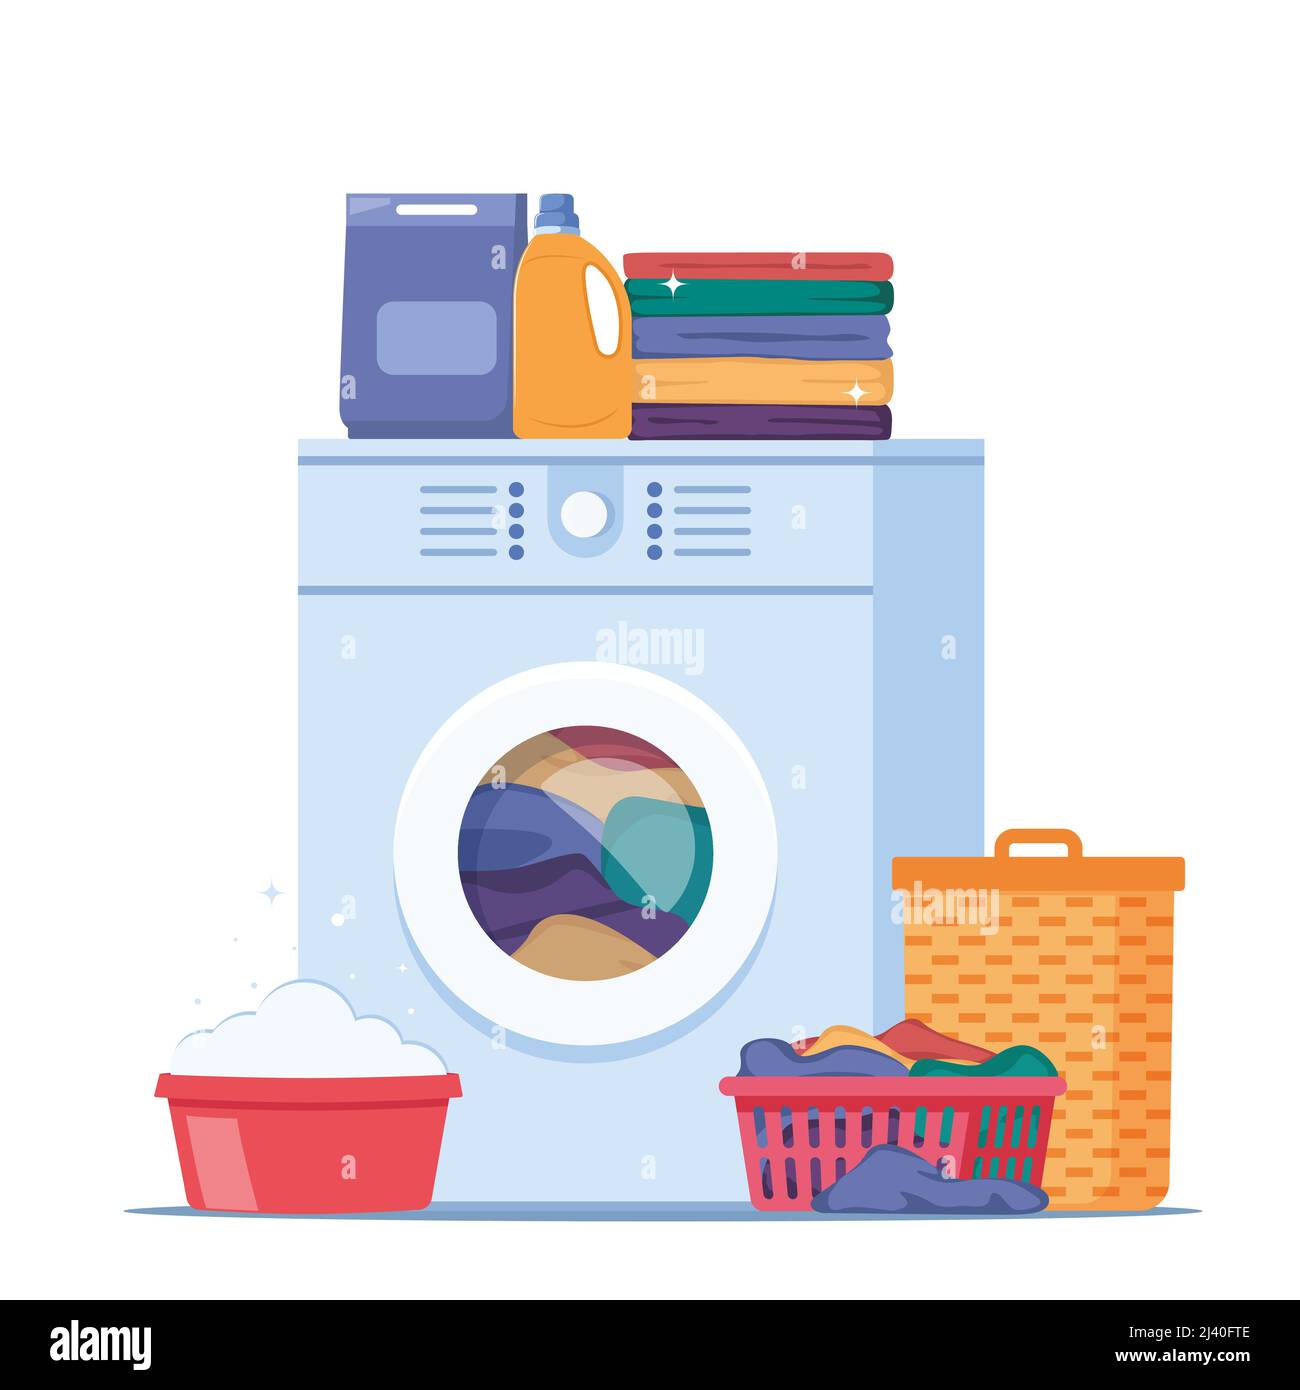 Laundry infographics with sequence of four different stages of washing process. Washing clothes. Dirty linen, washing machine, pile of clean clothes. Stock Vector